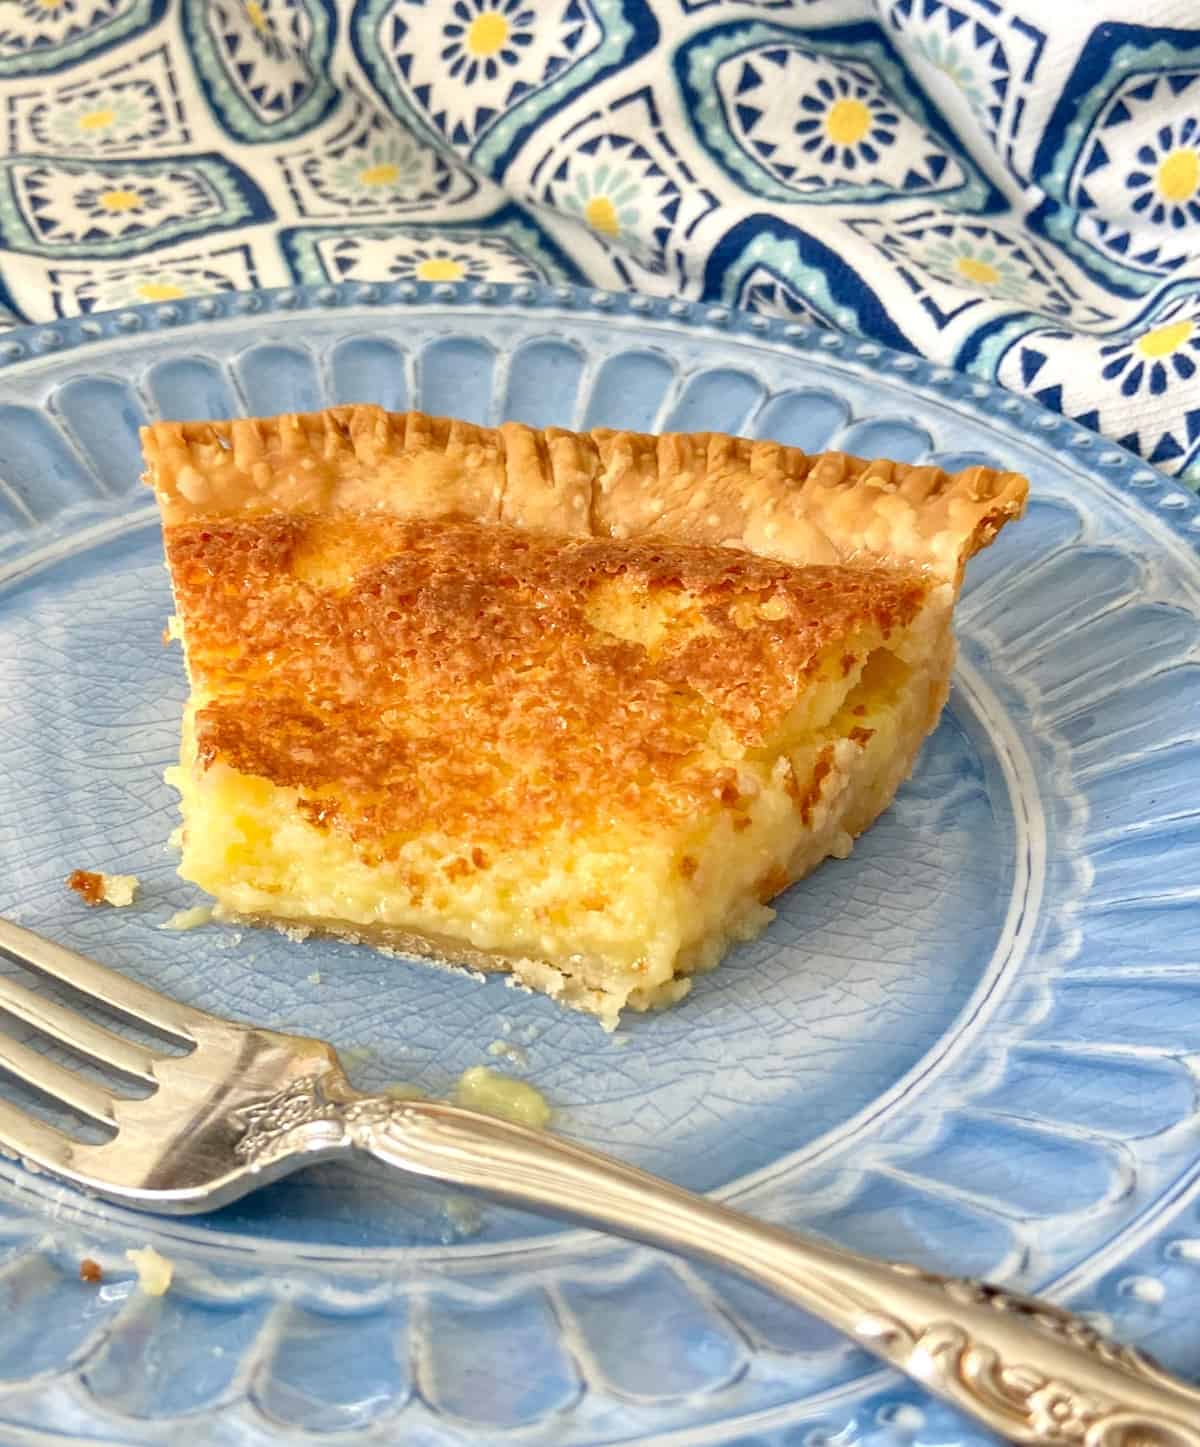 Buttermilk pie on blue plate with a fork.